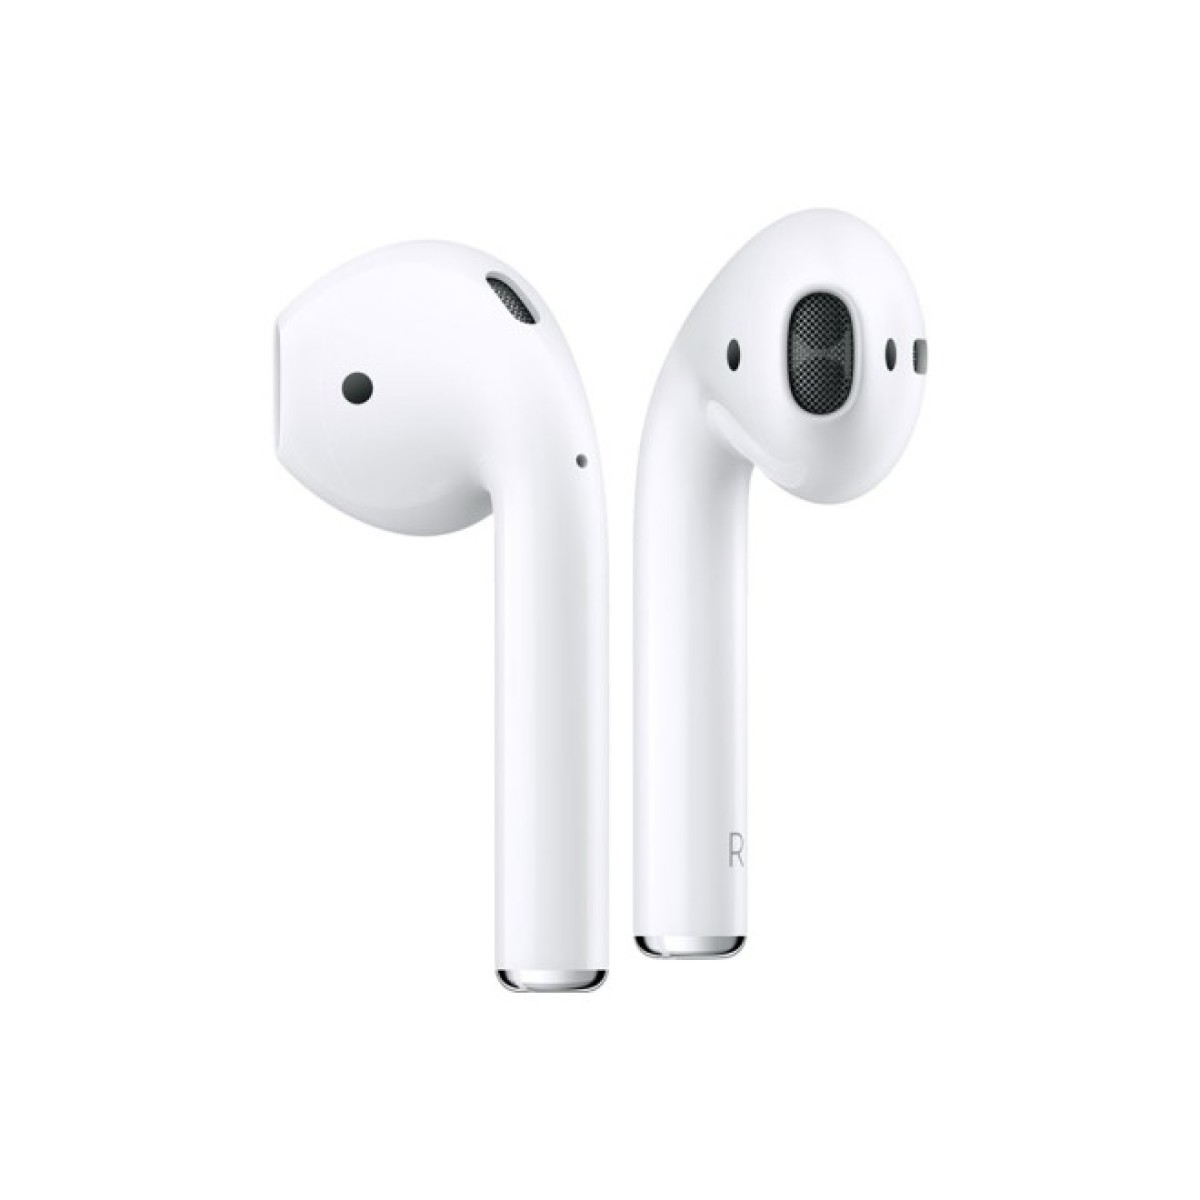 Навушники Apple AirPods with Charging Case (MV7N2TY/A) 256_256.jpg